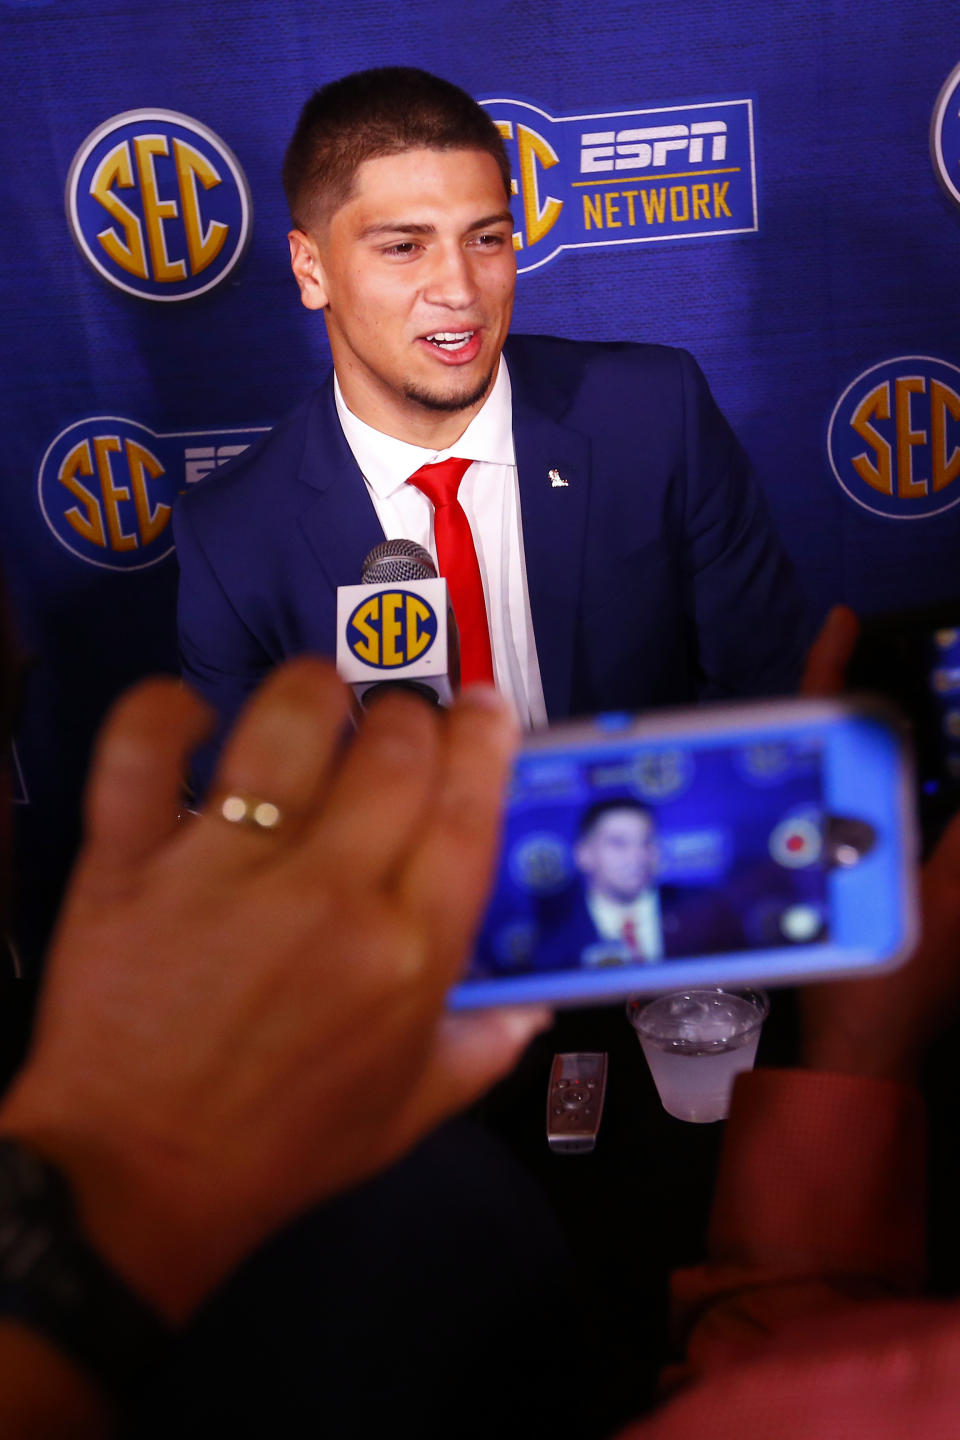 Mississippi quarterback Matt Corral speaks to reporters during the NCAA college football Southeastern Conference Media Days, Tuesday, July 16, 2019, in Hoover, Ala. (AP Photo/Butch Dill)